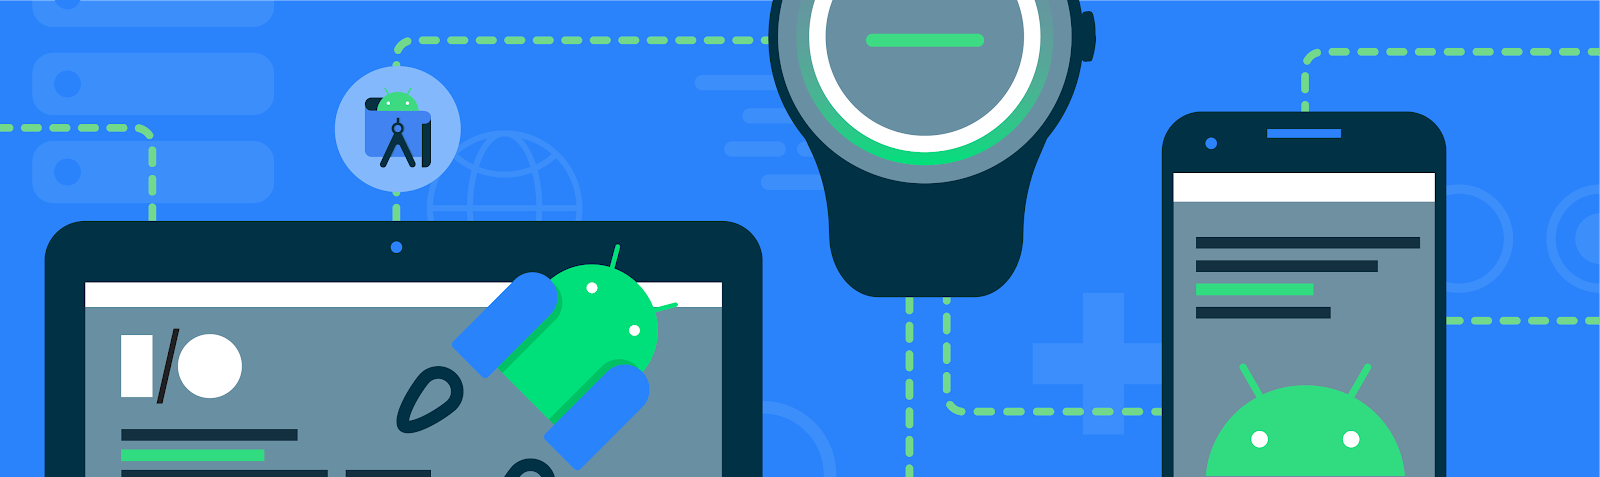 13 Things to know for Android developers at Google I/O!